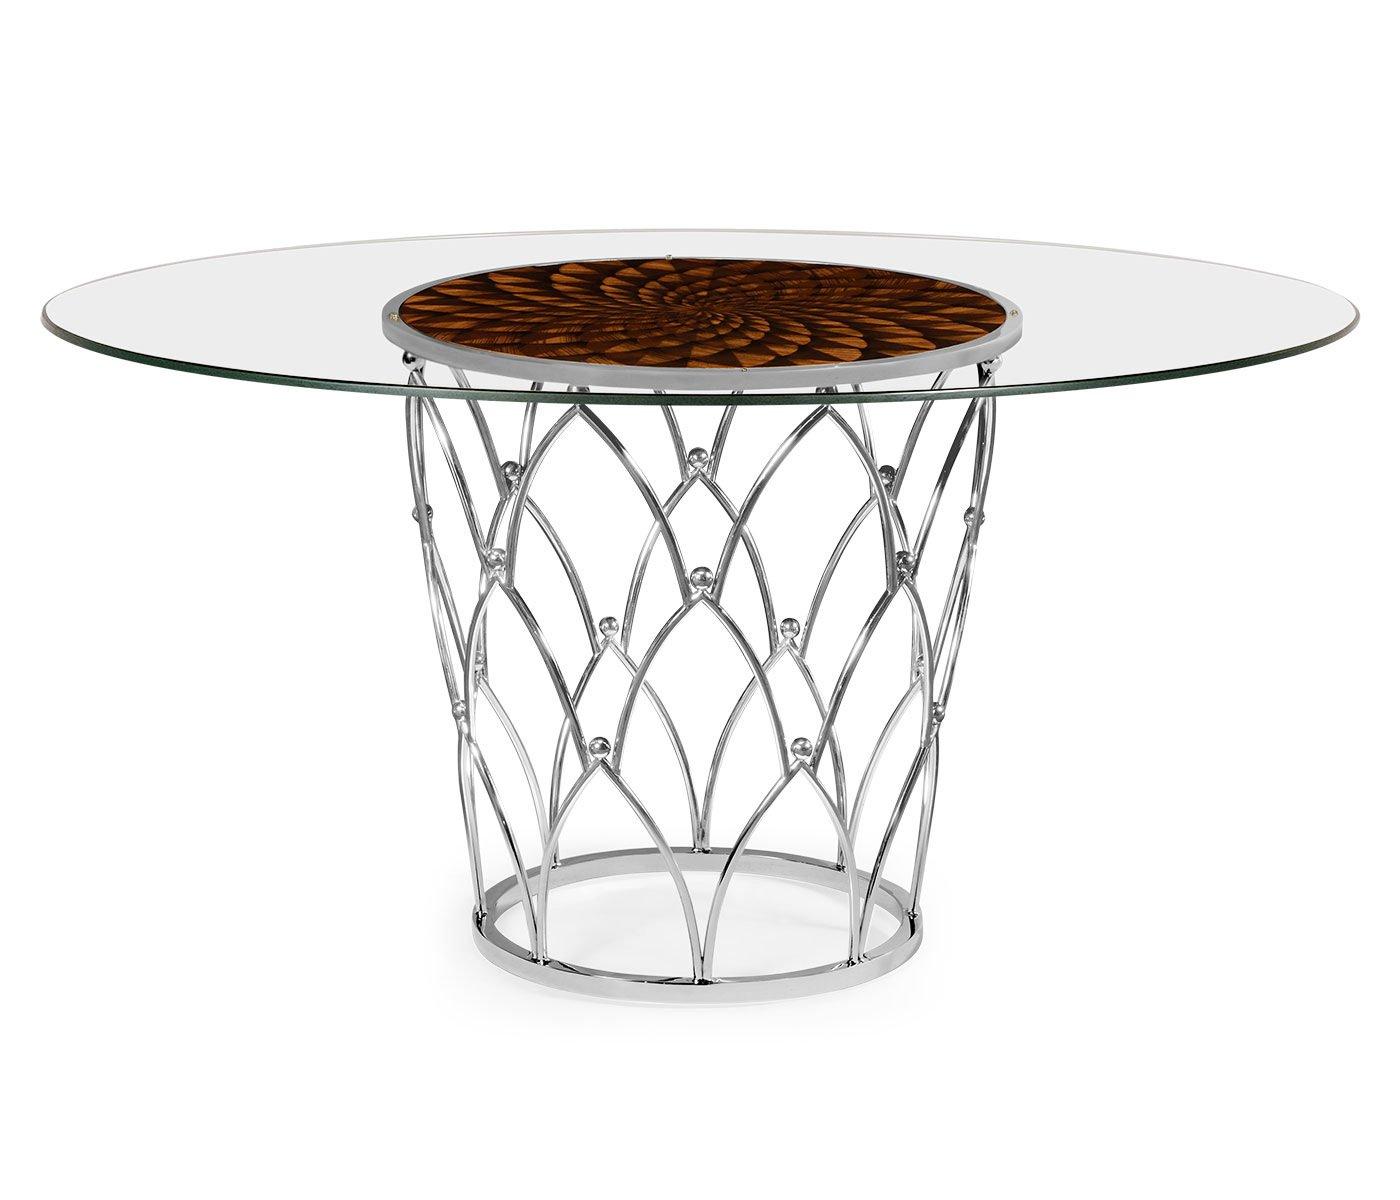 Load image into Gallery viewer, Round Dining Table with Feather Inlay
